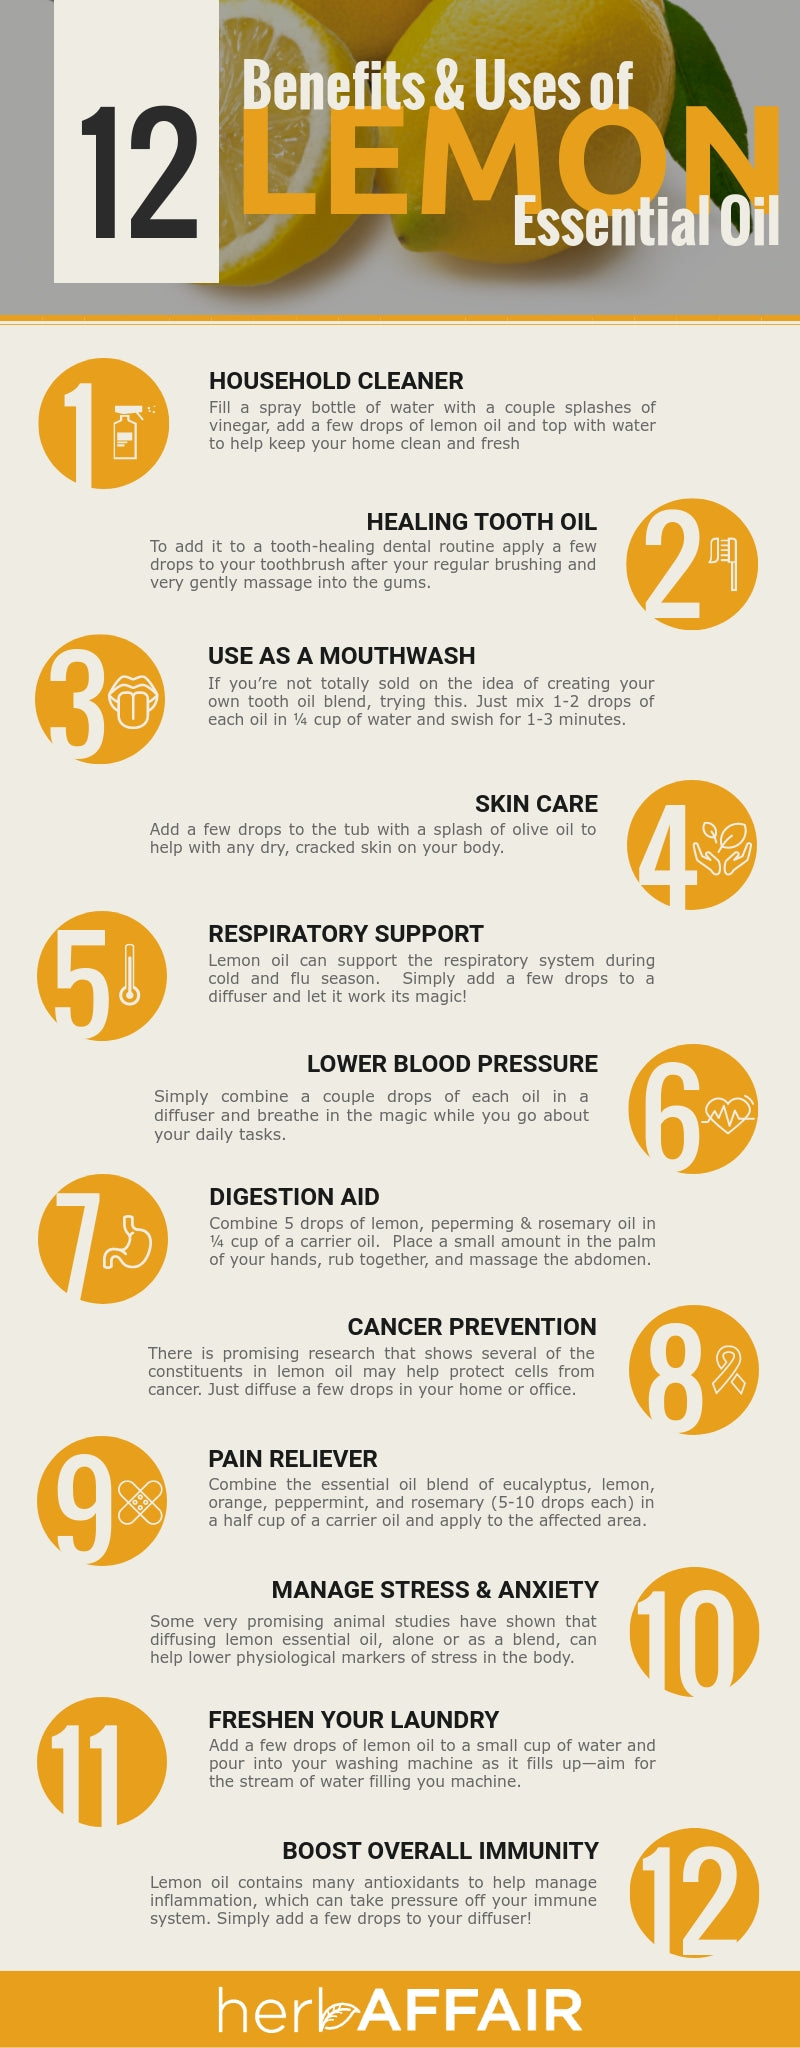 12 Benefits and Uses of Lemon Essential Oil